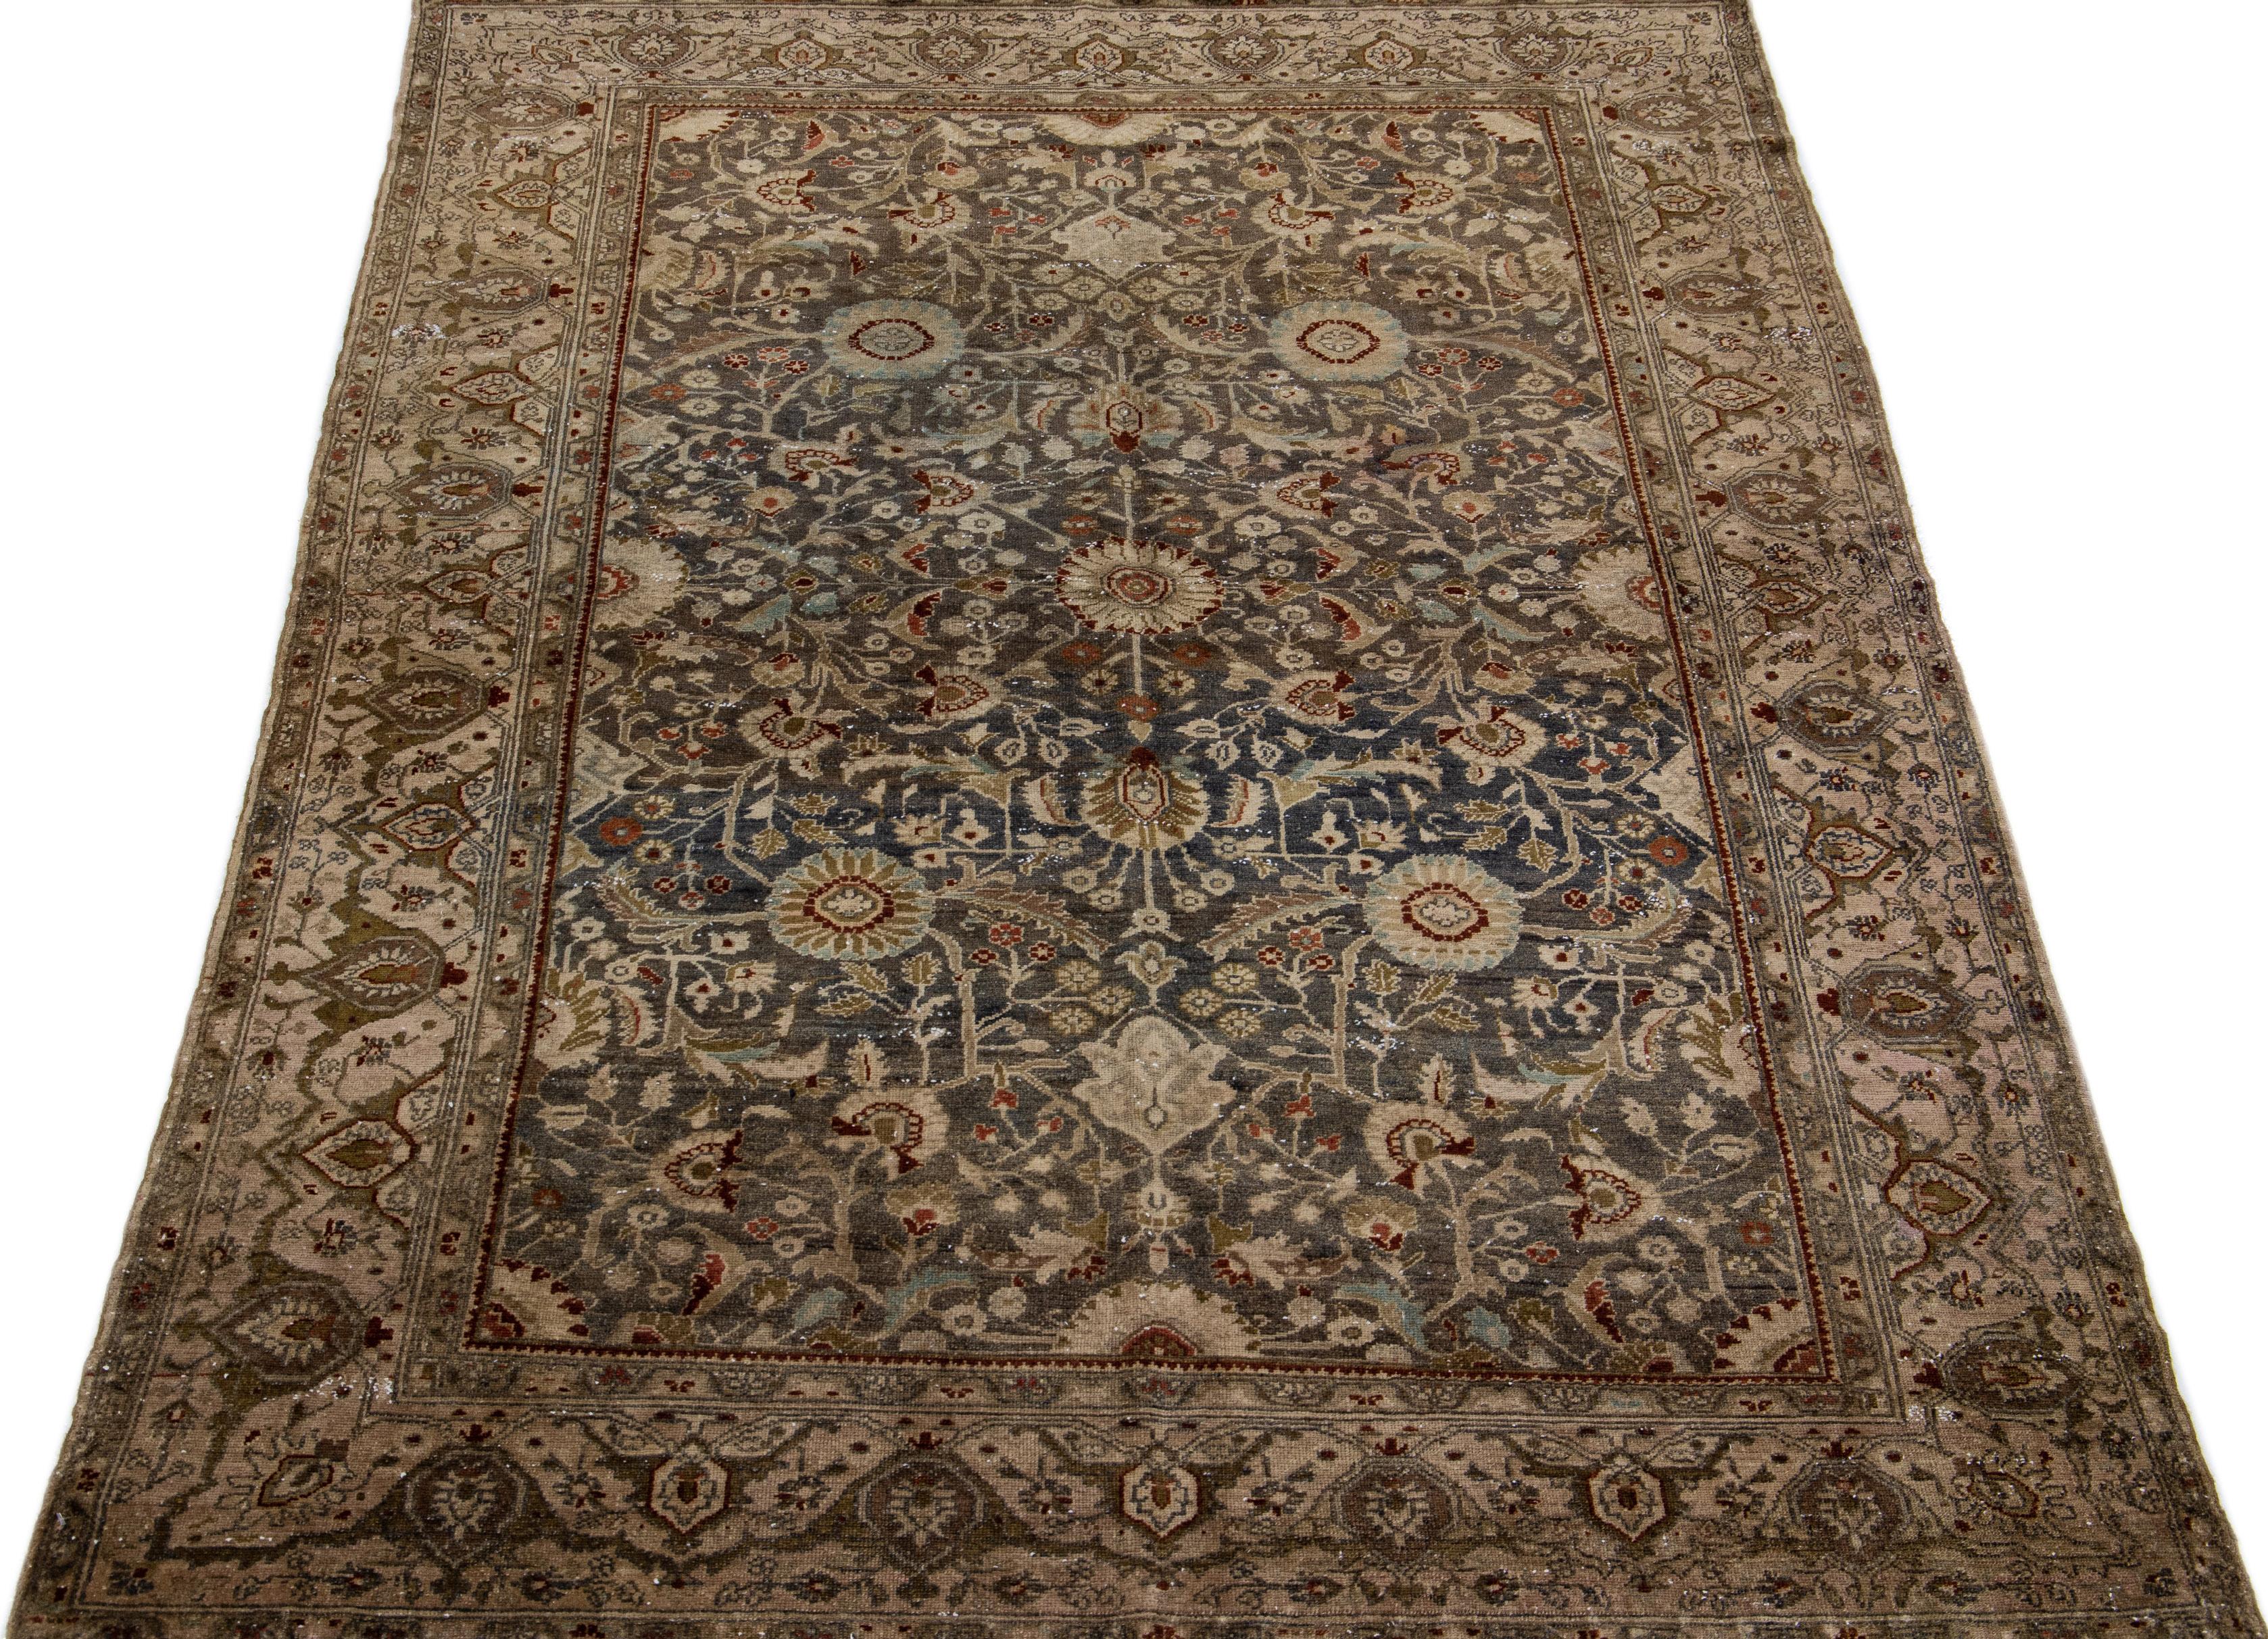 Beautiful Antique Malayer hand-knotted wool rug with a blue-gray color field. This Persian rug has a brown frame and multicolor accents in an all-over medallion floral design.

This rug measures 5'1